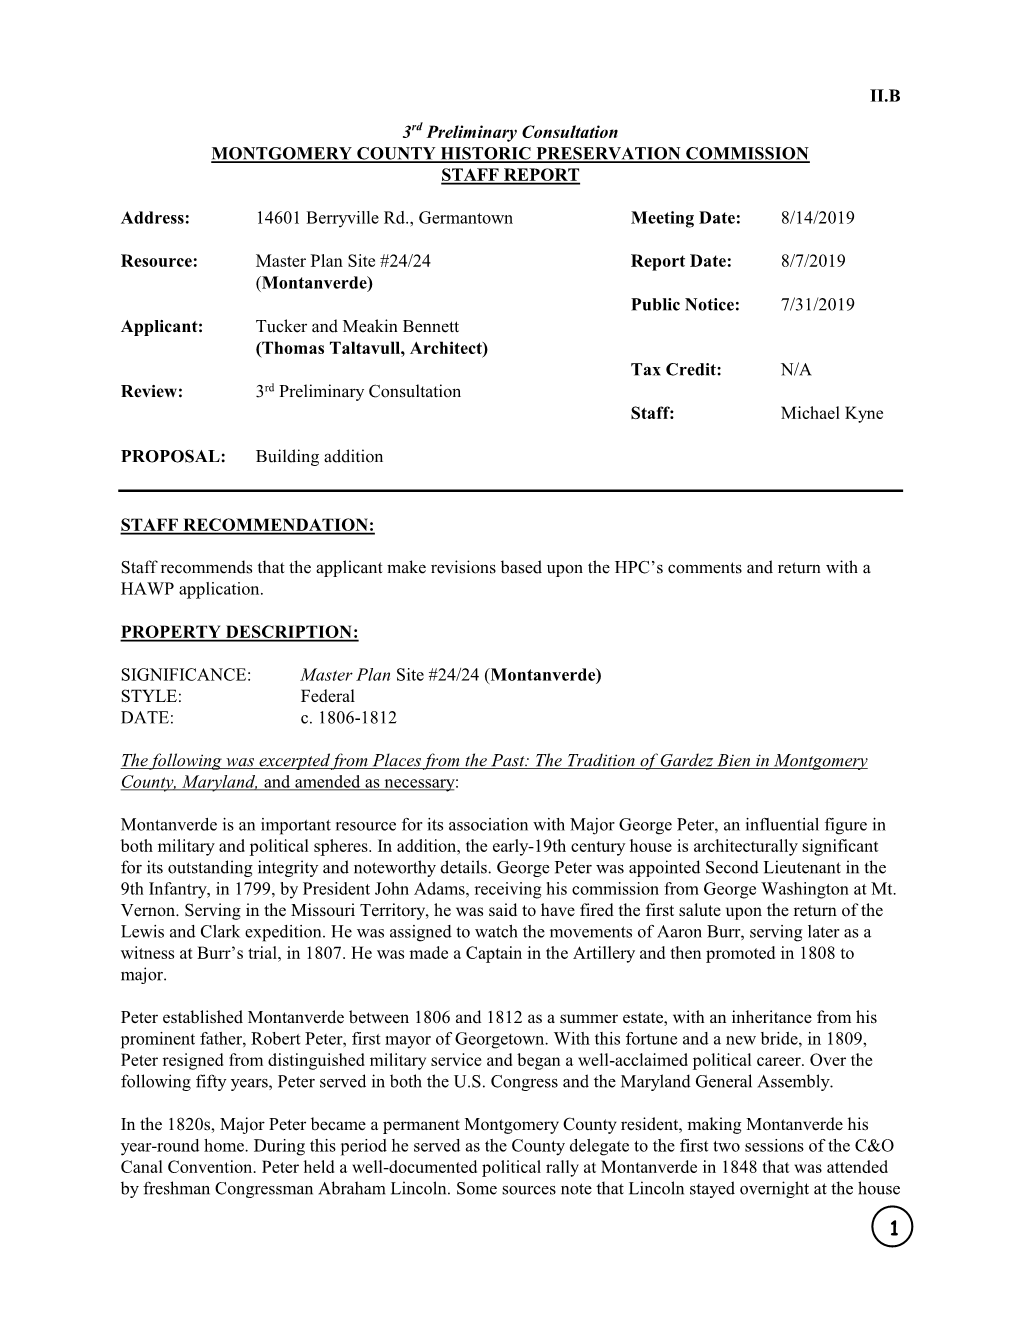 II.B 3Rd Preliminary Consultation MONTGOMERY COUNTY HISTORIC PRESERVATION COMMISSION STAFF REPORT